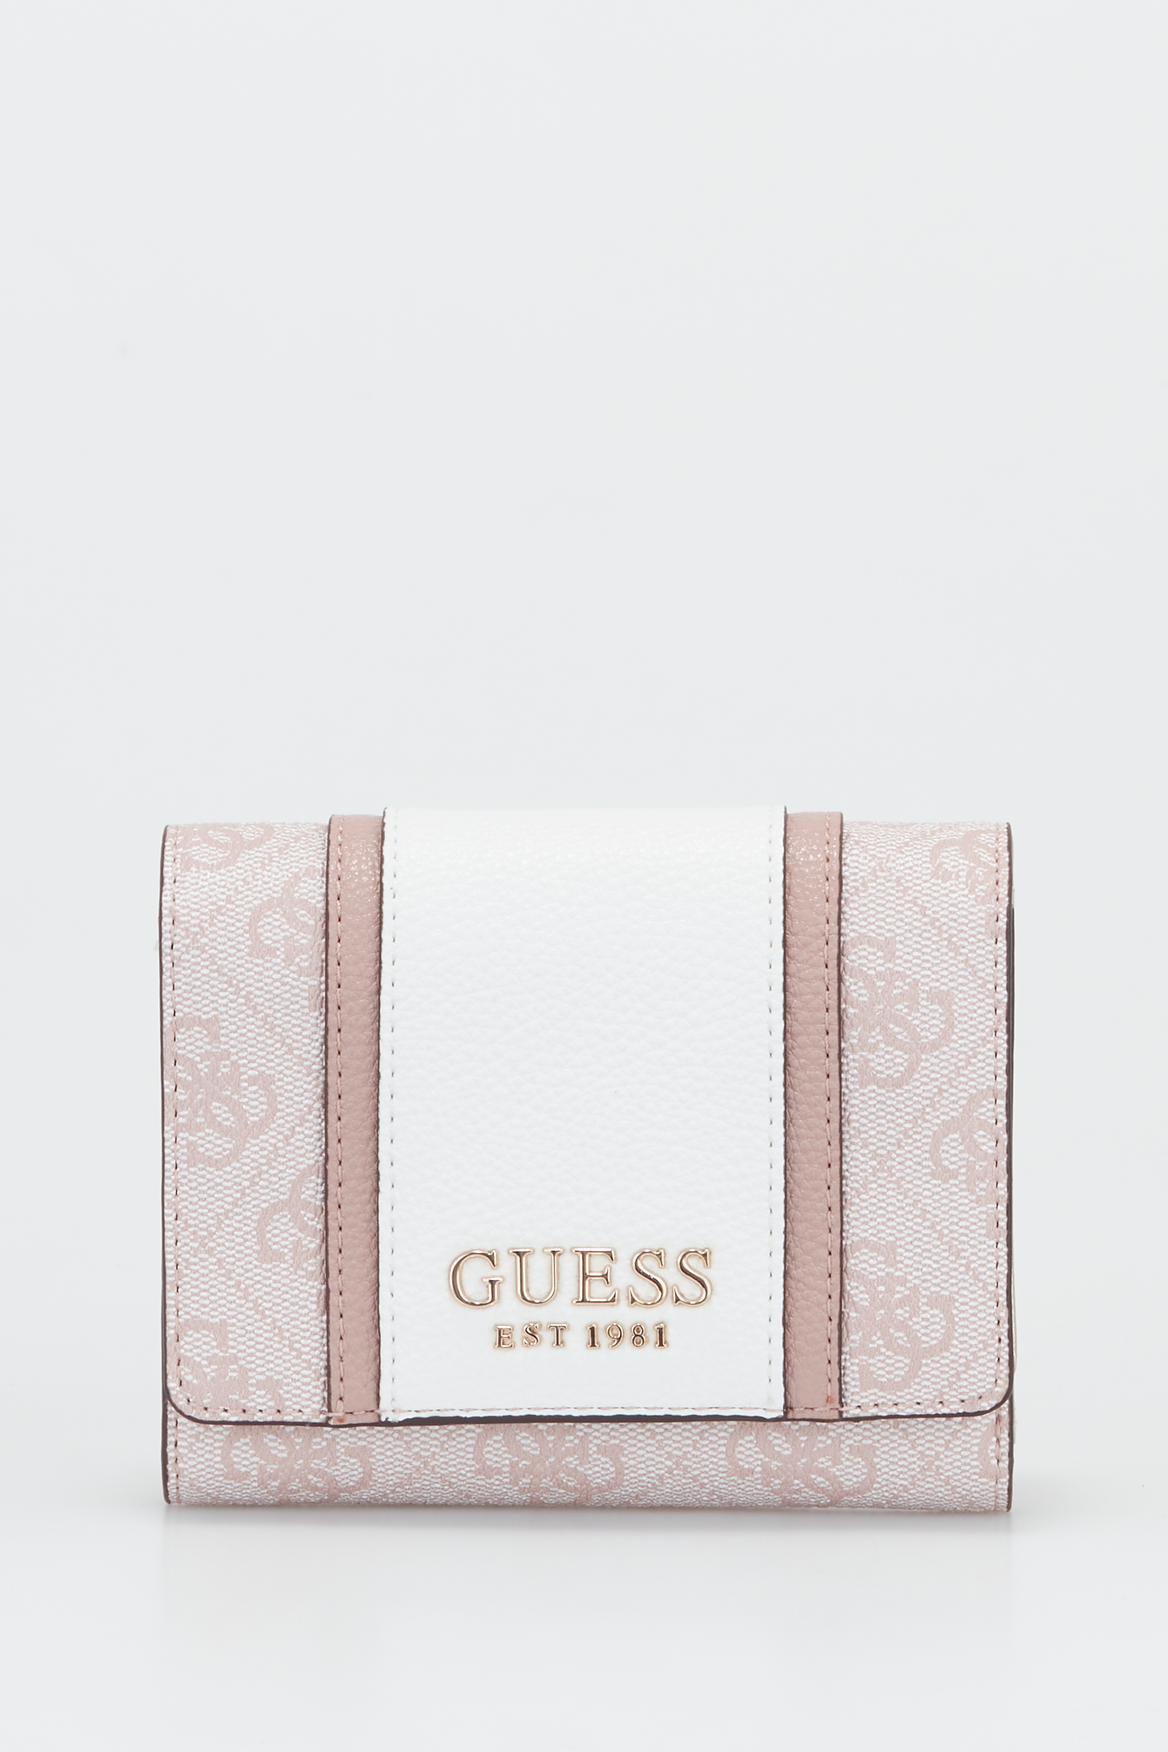 Guess Cathleen Small Clutch – Australia